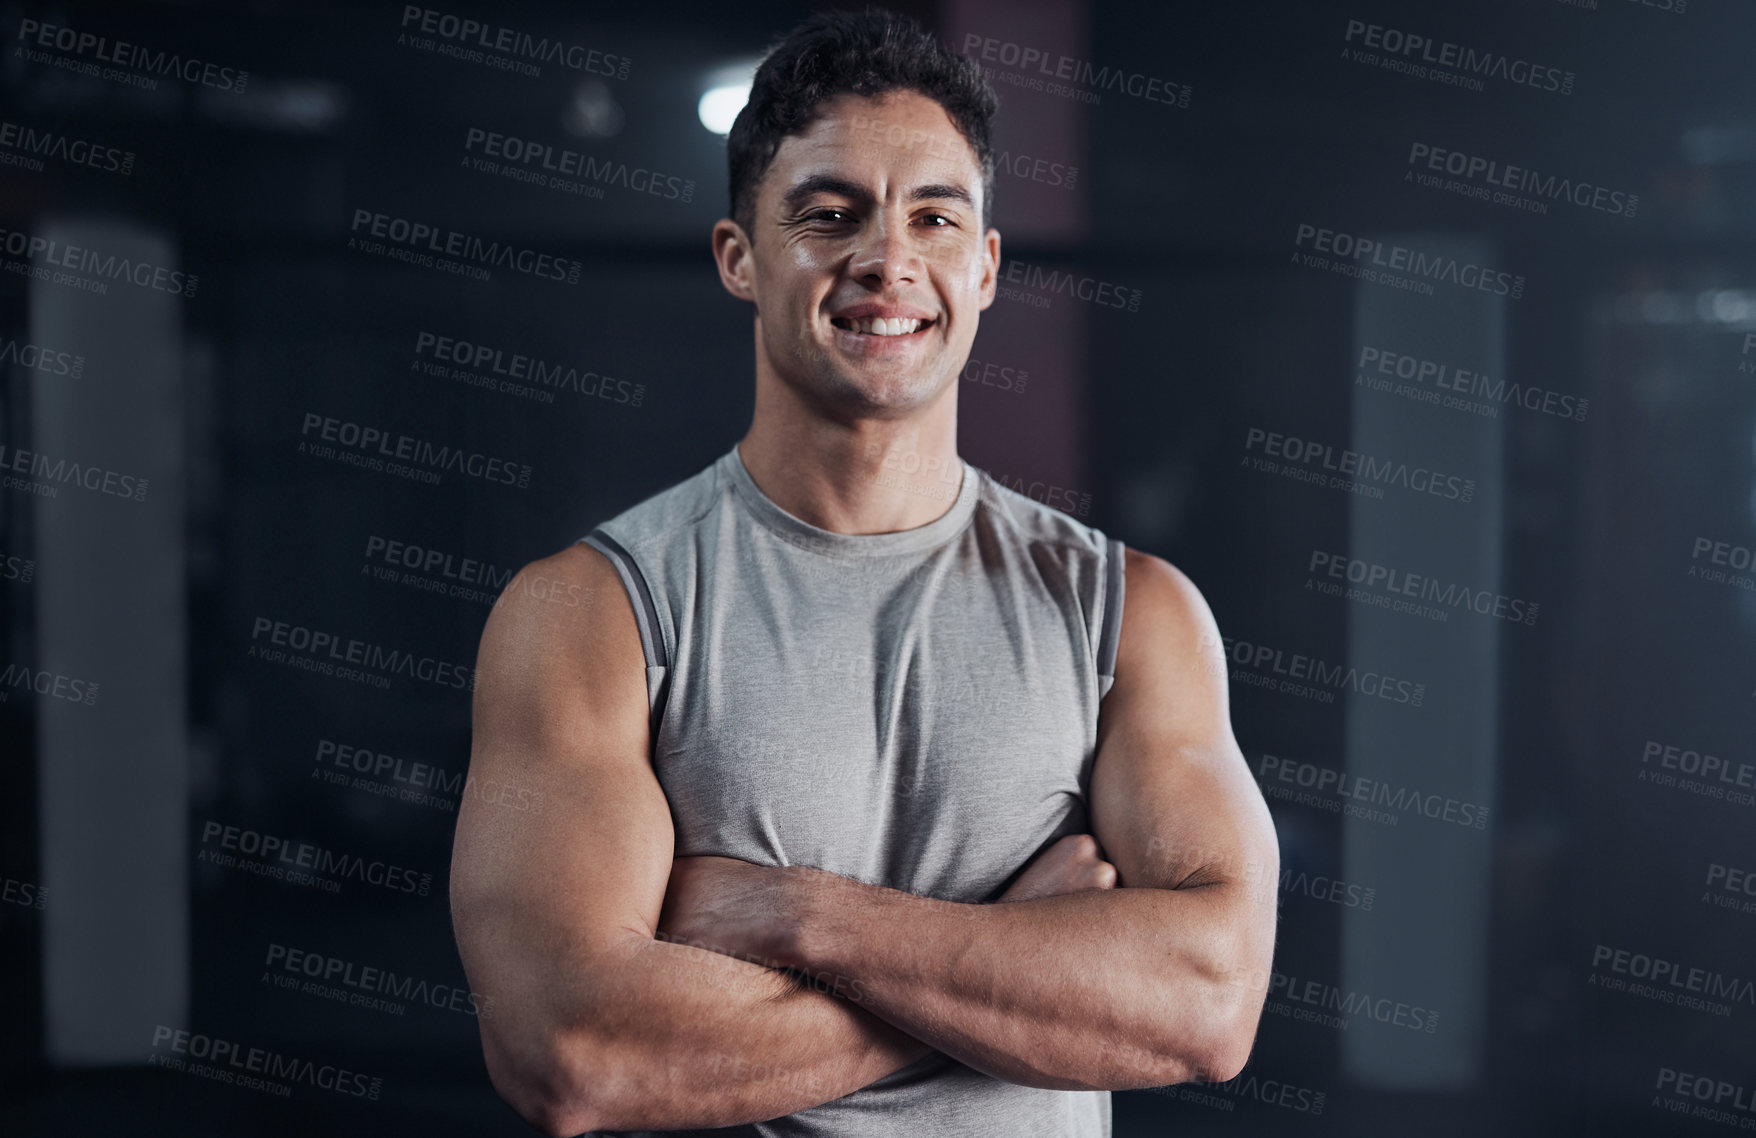 Buy stock photo Portrait of a confident young man at a gym